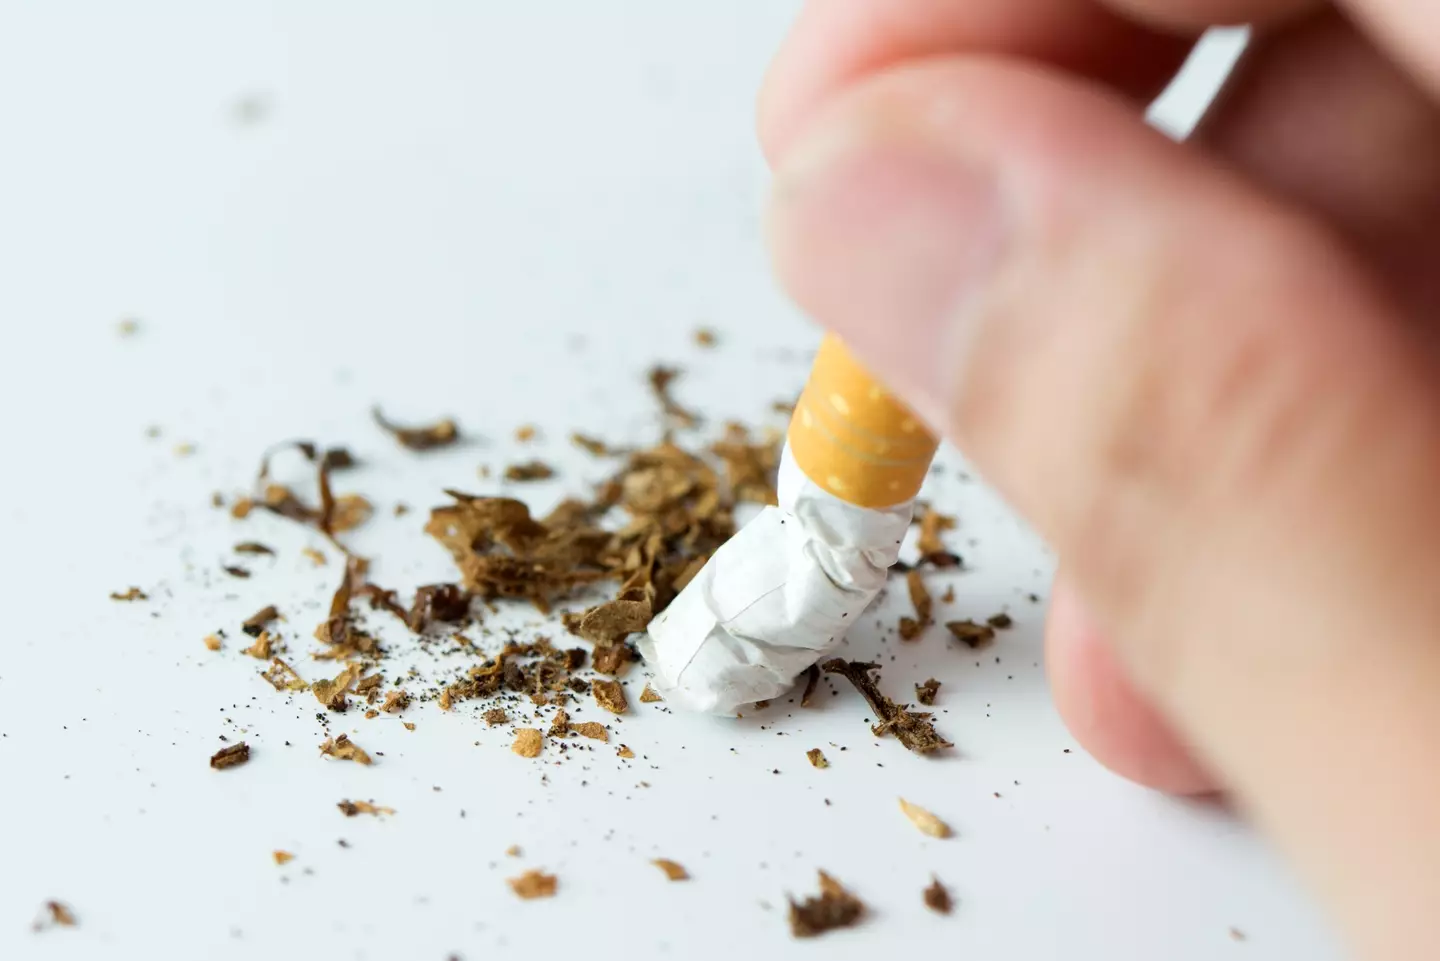 Quitting smoking can benefit your health and your wallet.